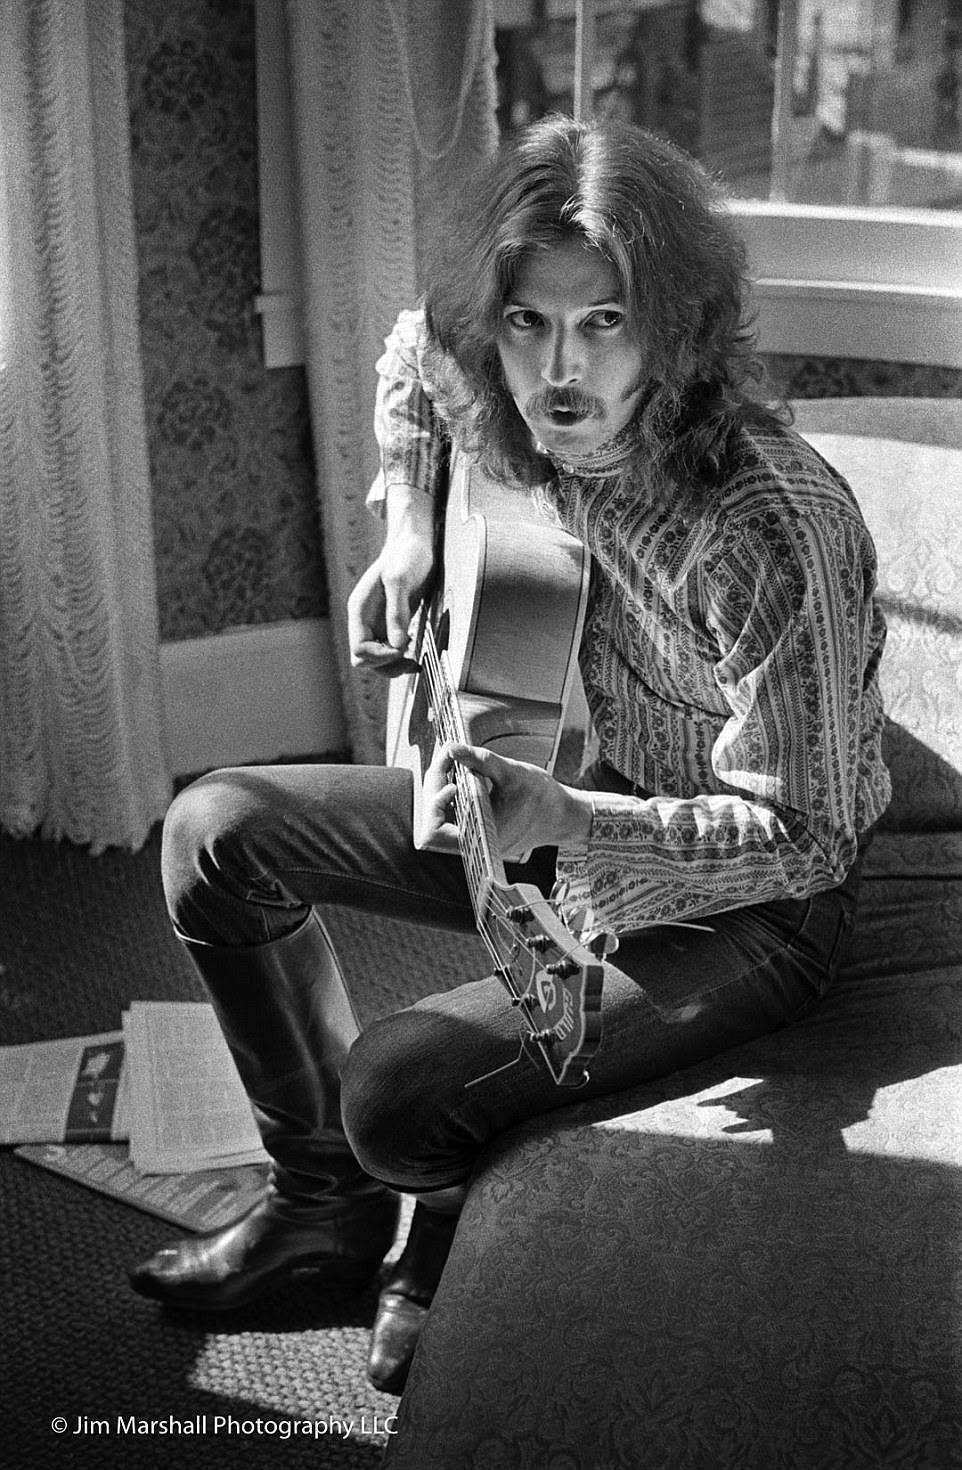 The close relationship and incredible access Jim Marshall had to musicians of the era - and down through the years - is evidenced by this picture of Eric Clapton playing guitar in the photographer's apartment on Union Street in August 1967